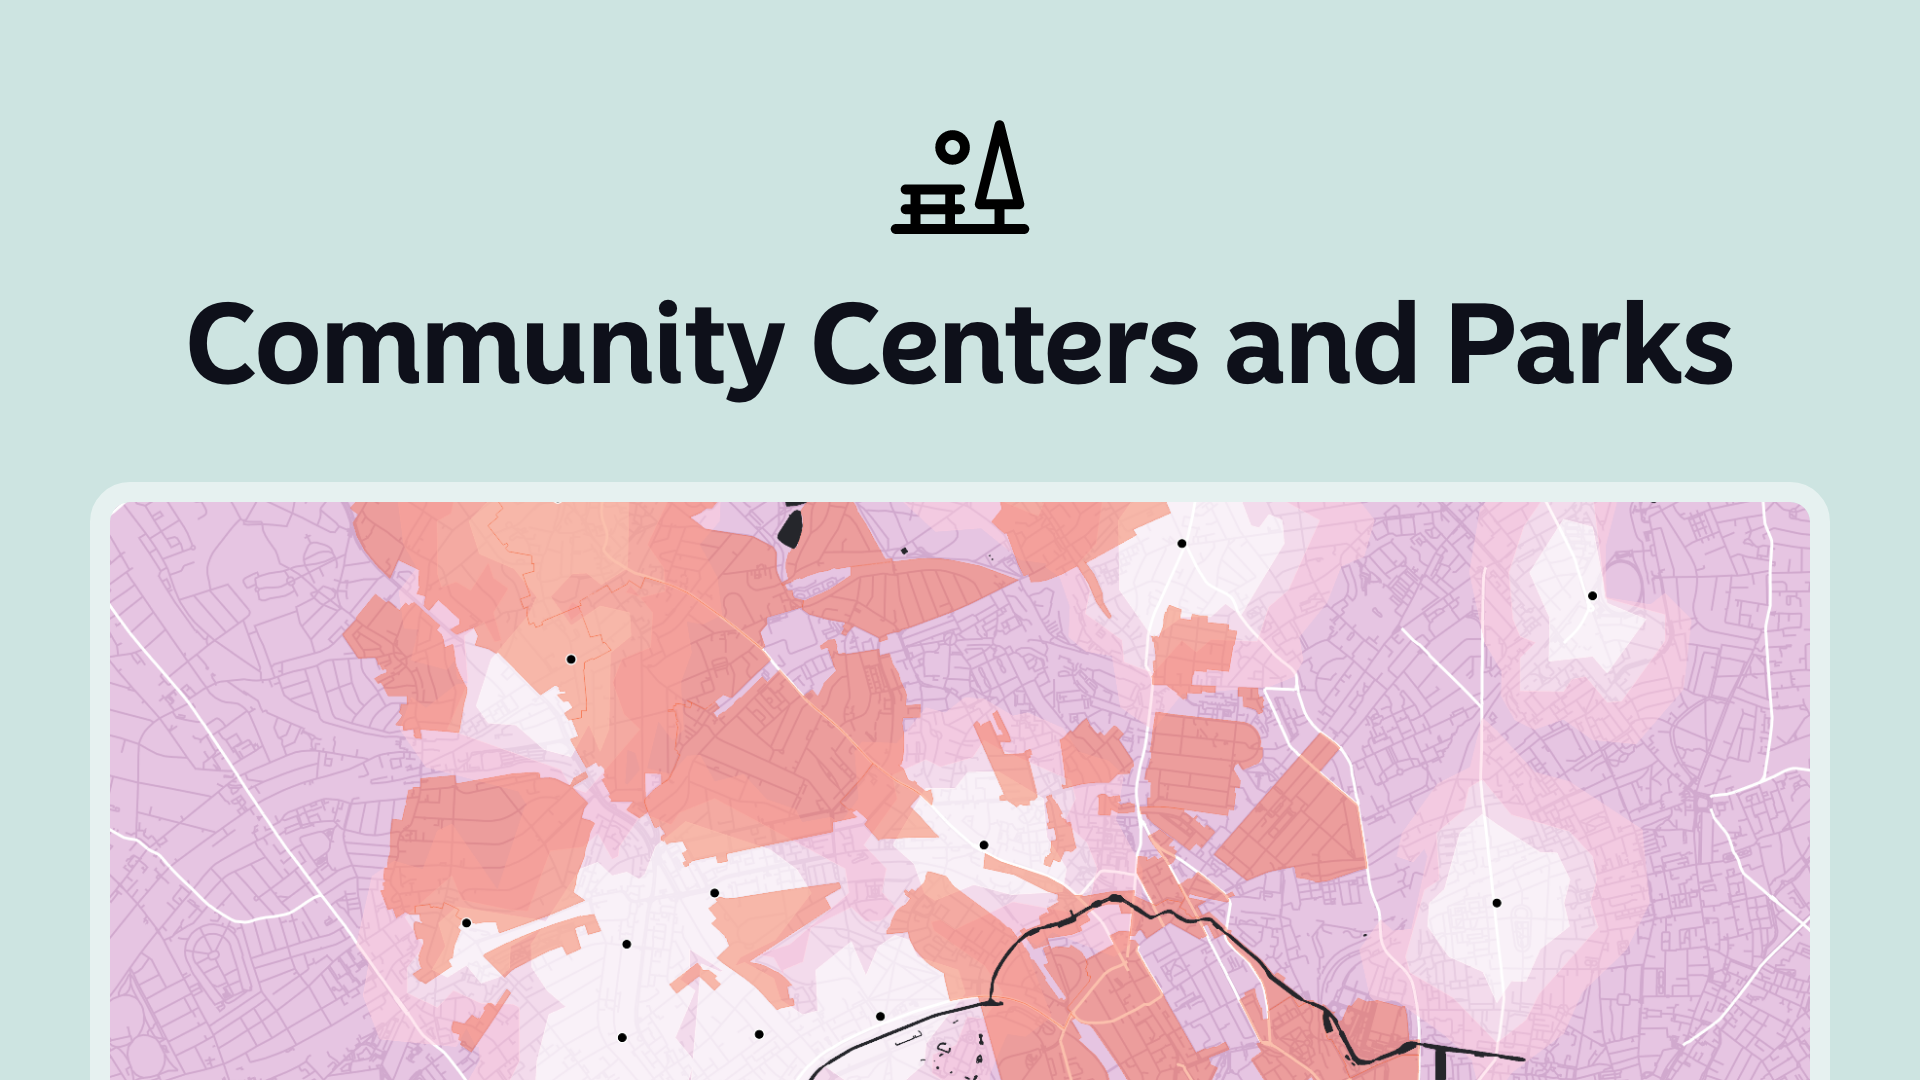 Identify Locations for New Community Centers and Parks